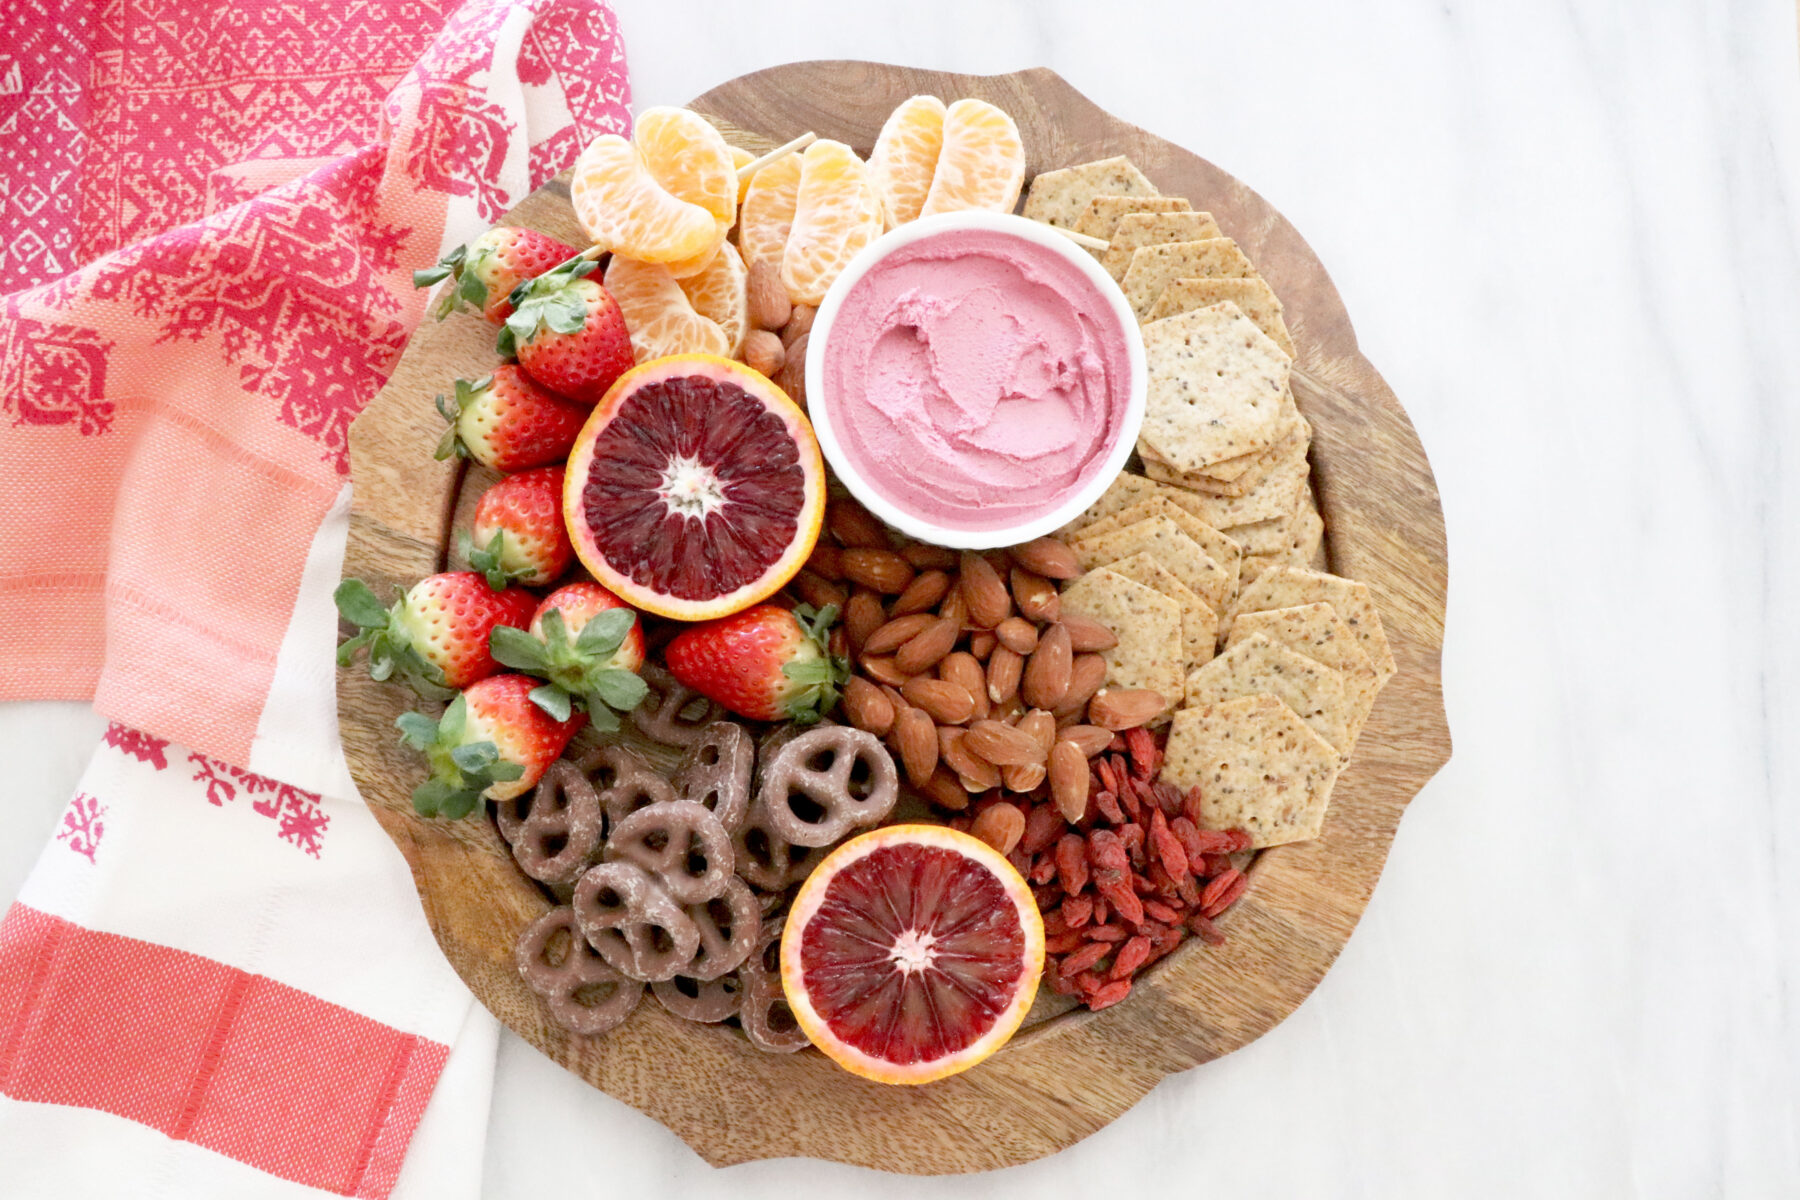 Gluten Free, Dairy Free Fruit, Nuts, and Crackers Valentine's Day Snack Board